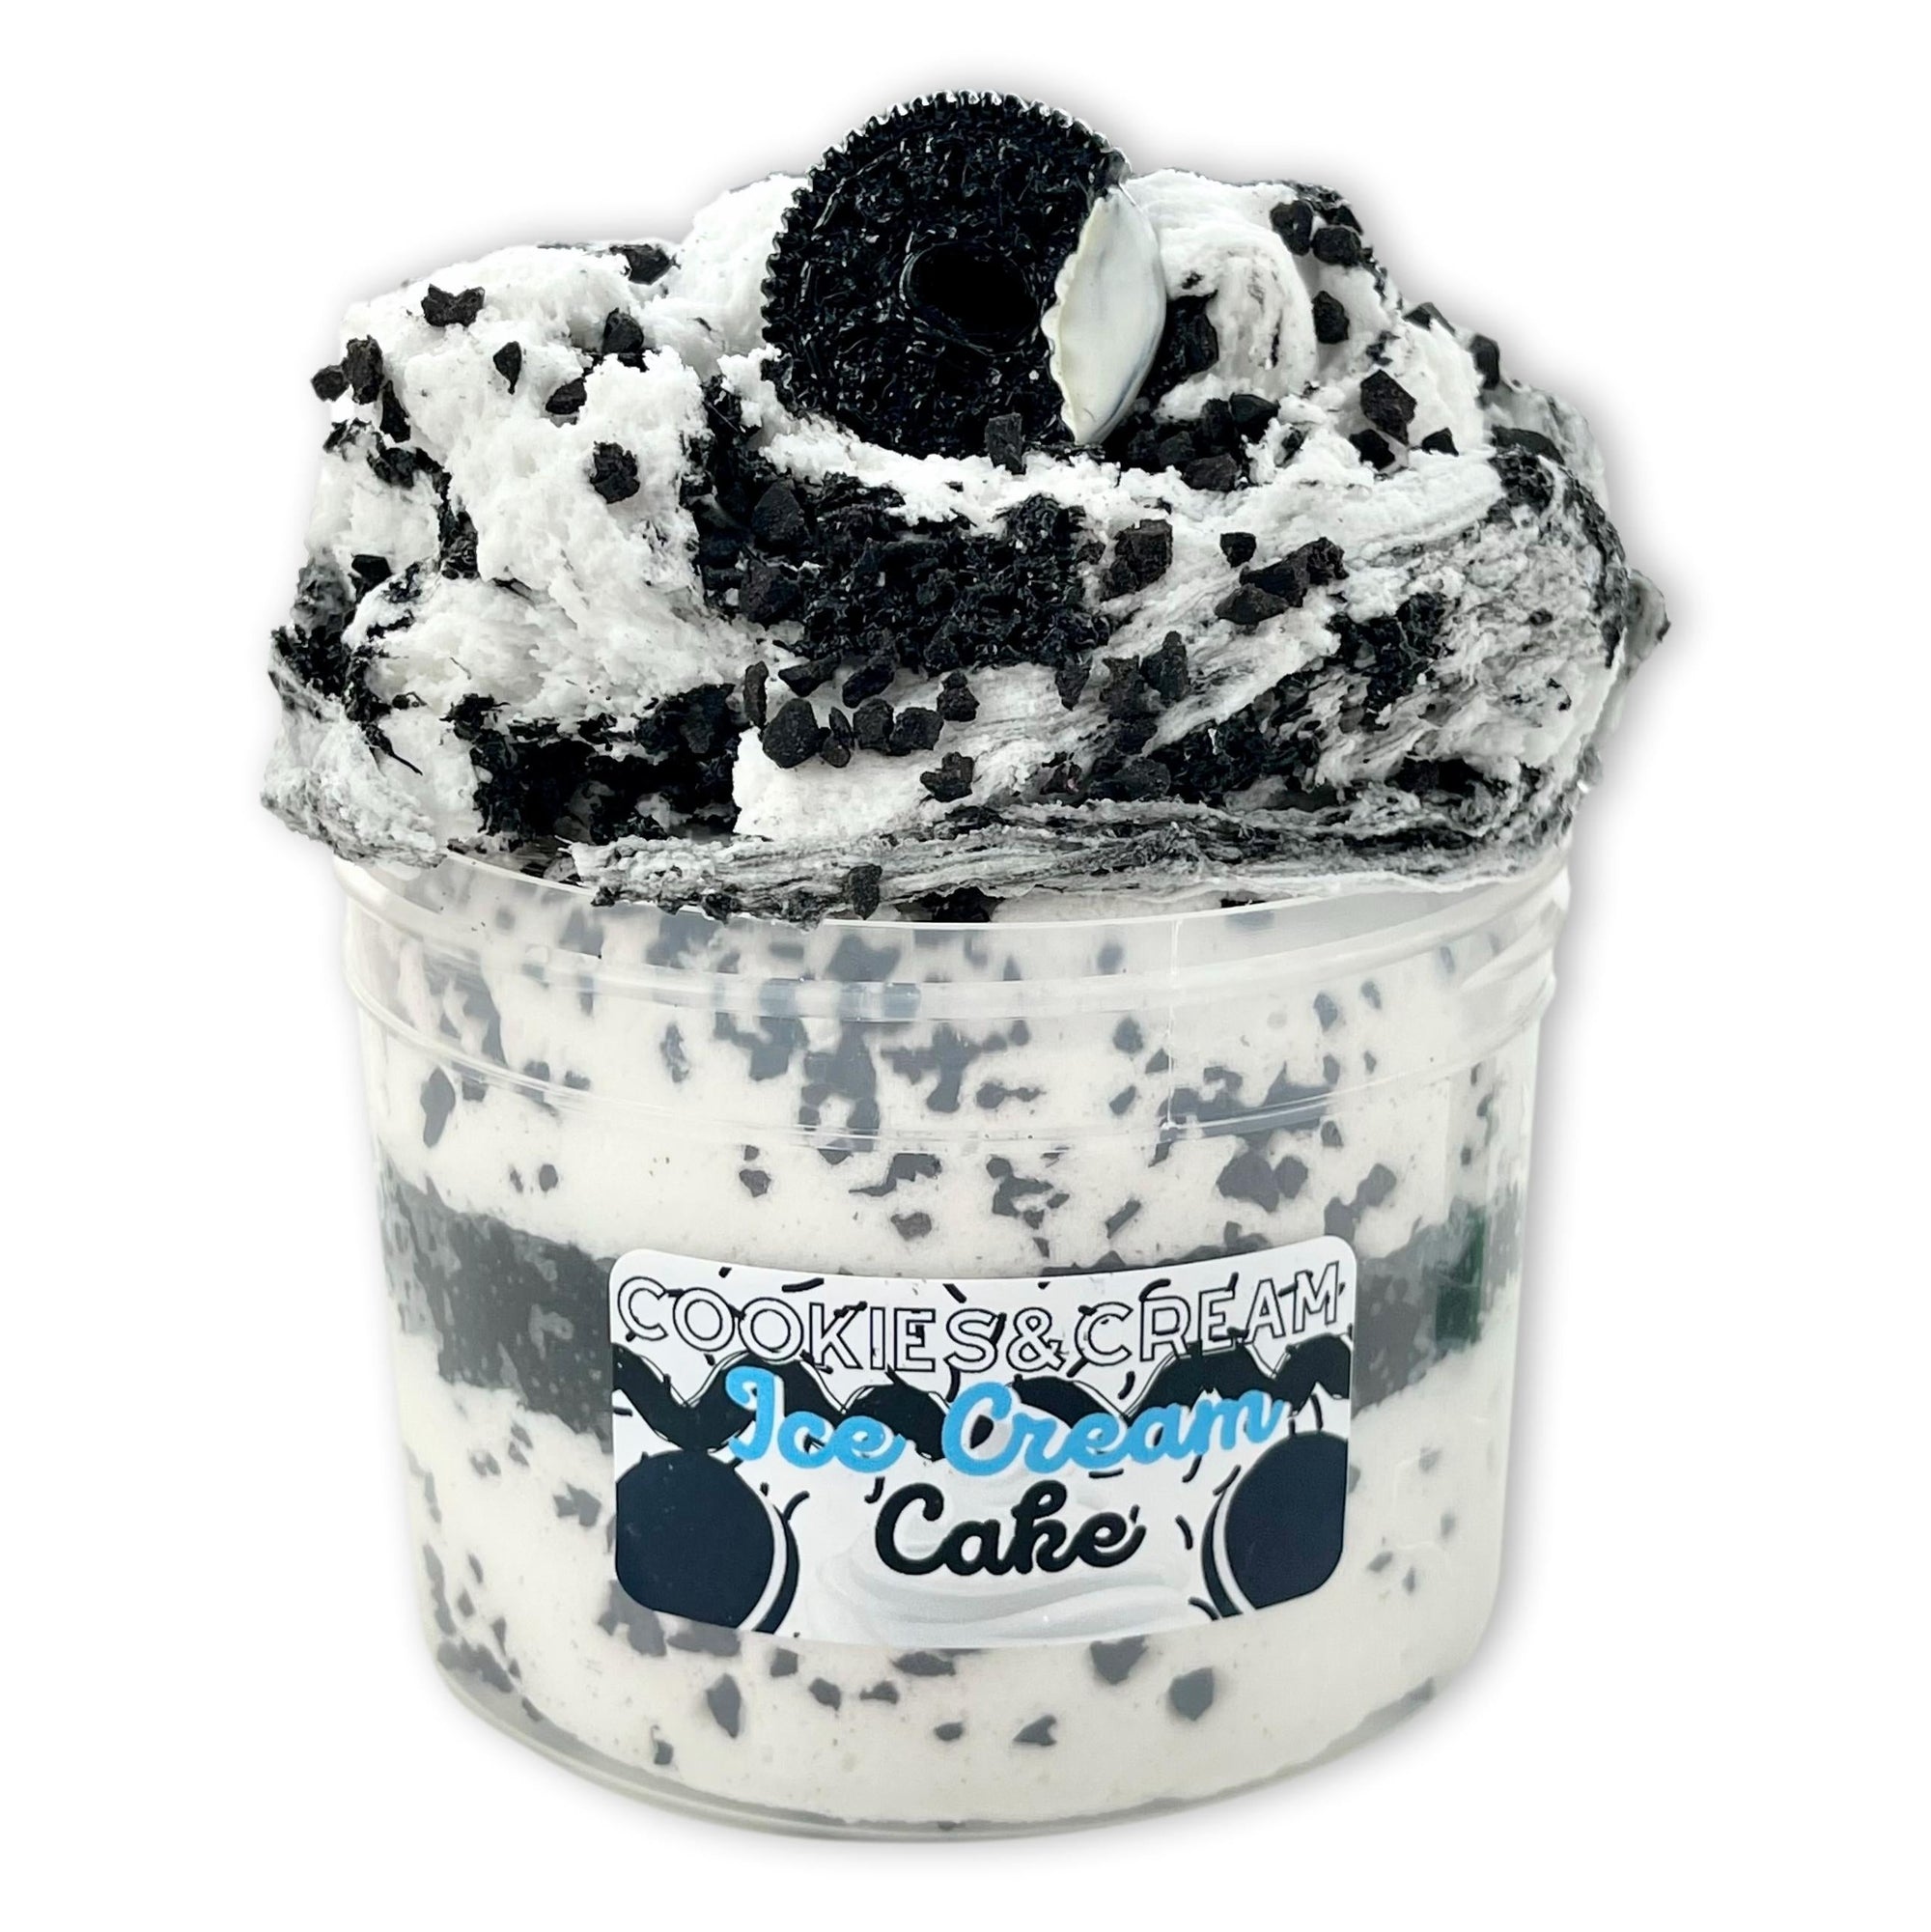 Birthday Cake Ice Cream - Butter Textured Slime - Handmade in USA - Dope  Slimes - Scented - White